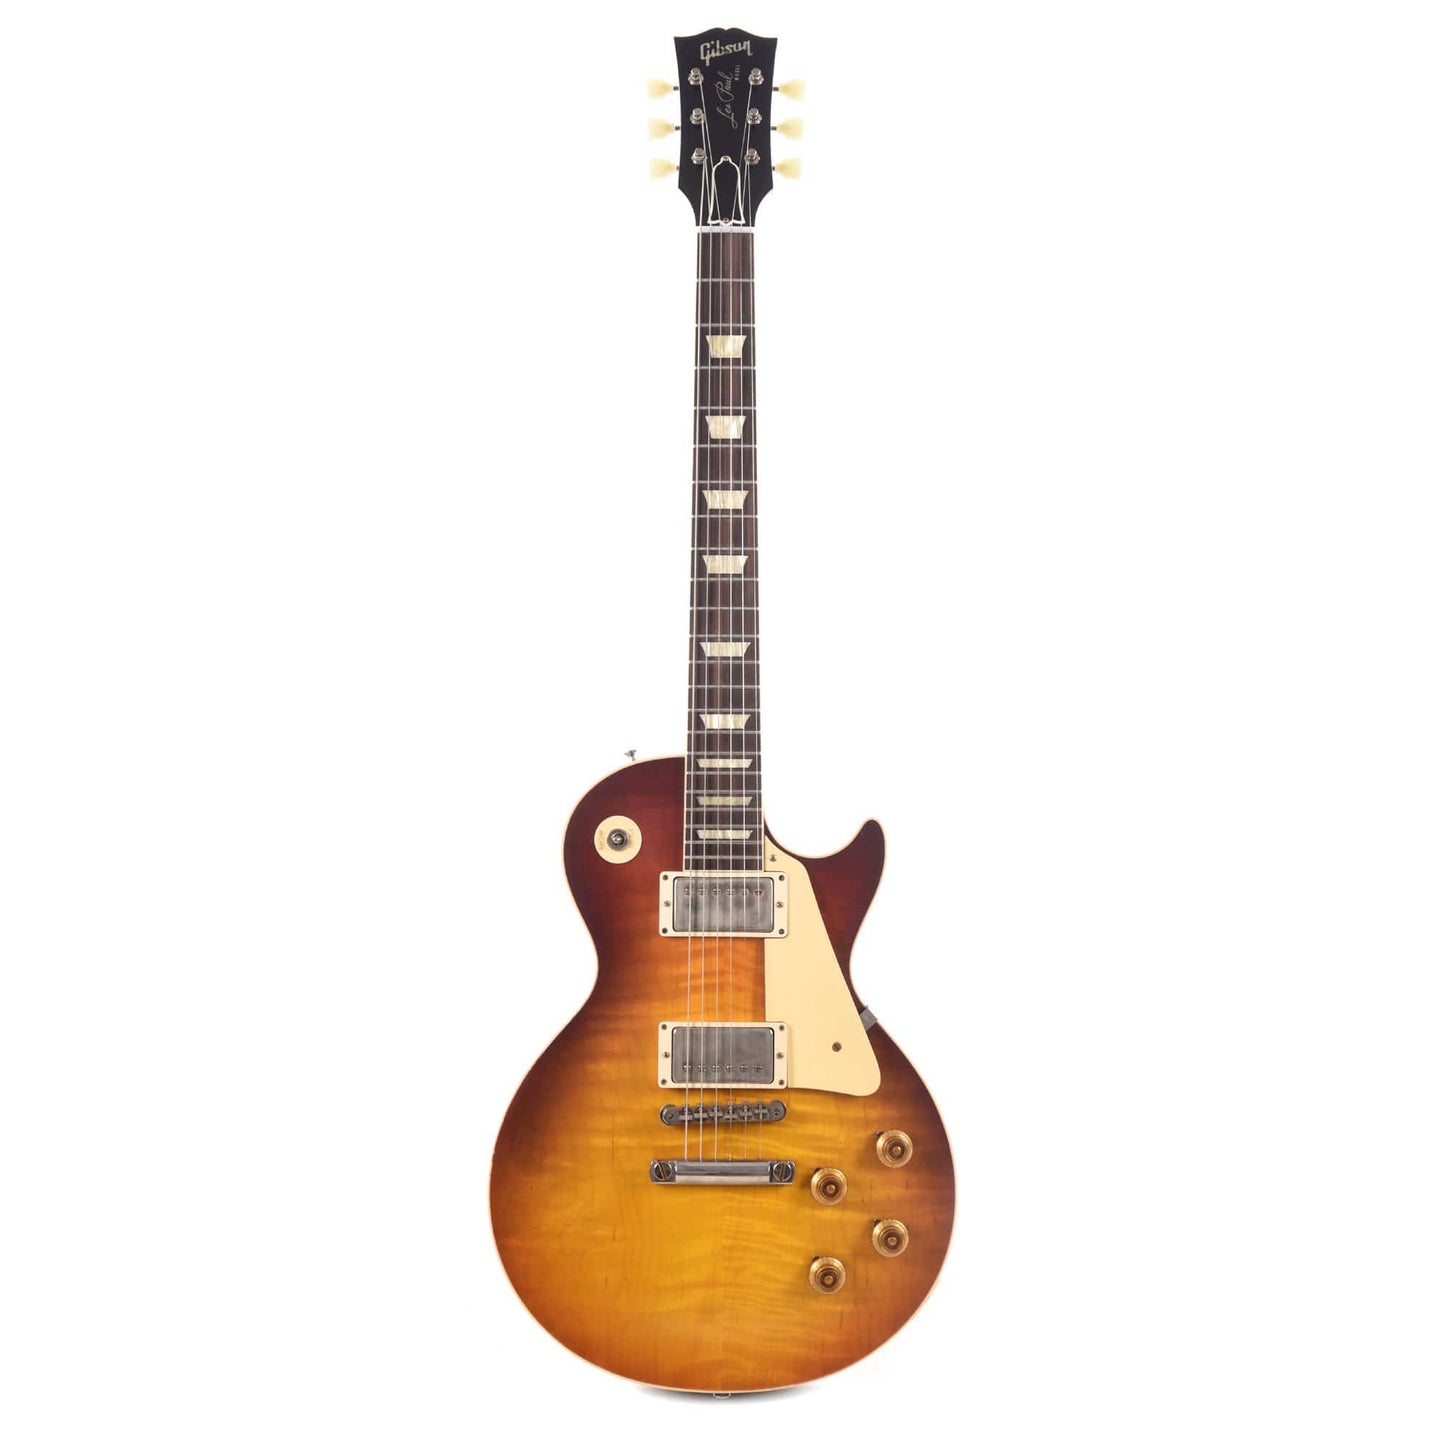 Gibson Custom 1958 Les Paul Standard "CME Spec" Plain Top Slow Iced Tea Fade VOS w/60 V2 Neck Profile Electric Guitars / Solid Body